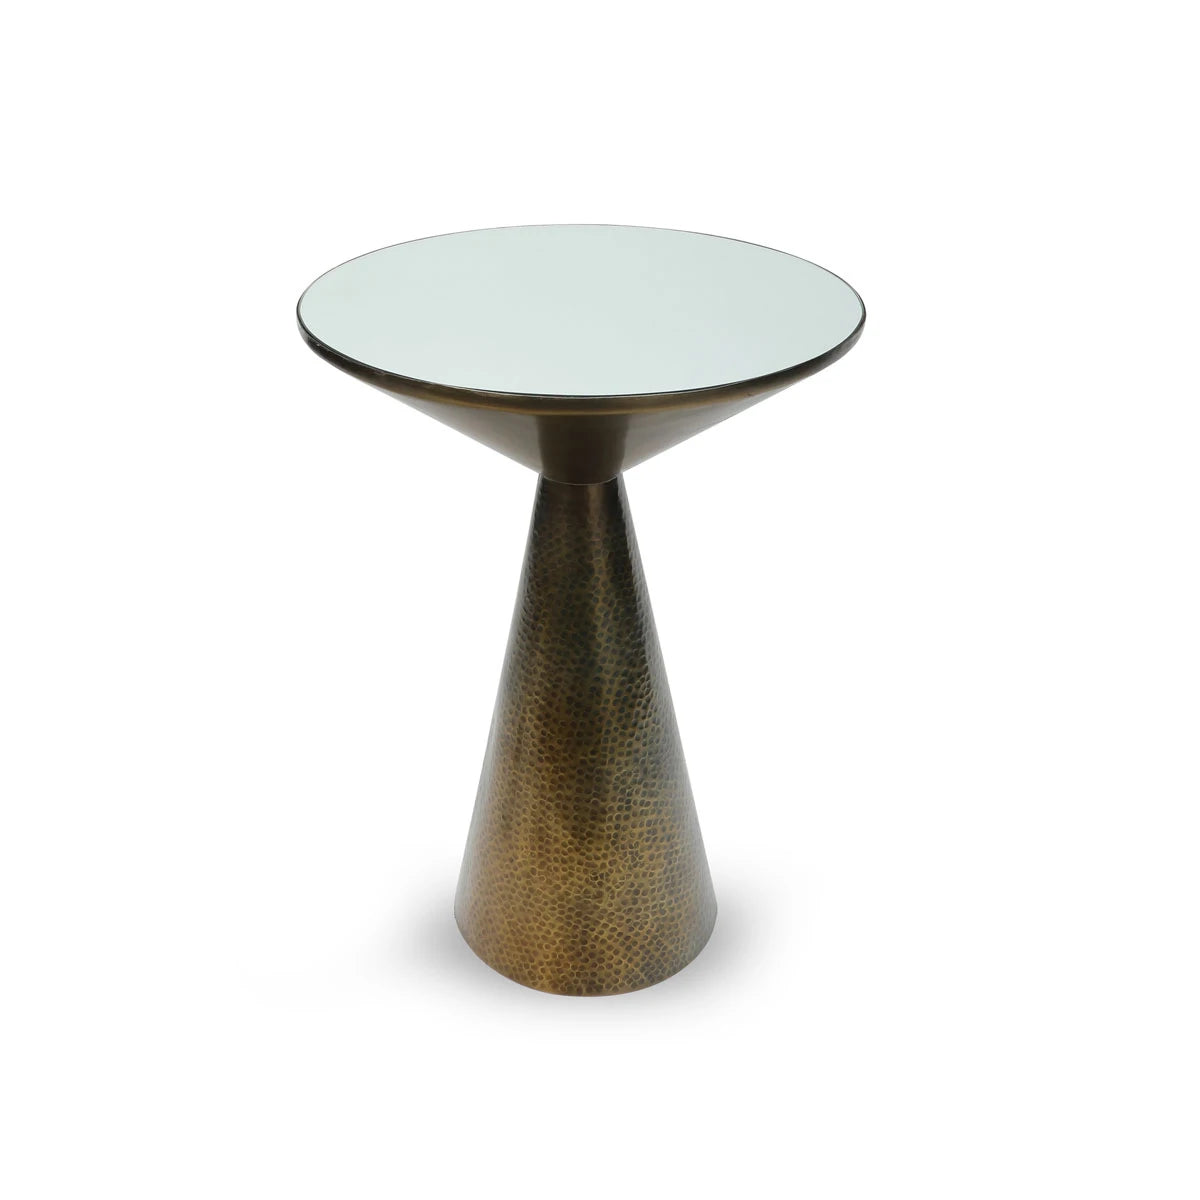 Top View of Hand-Hammered Textured Brass Metal Table with Glass Top